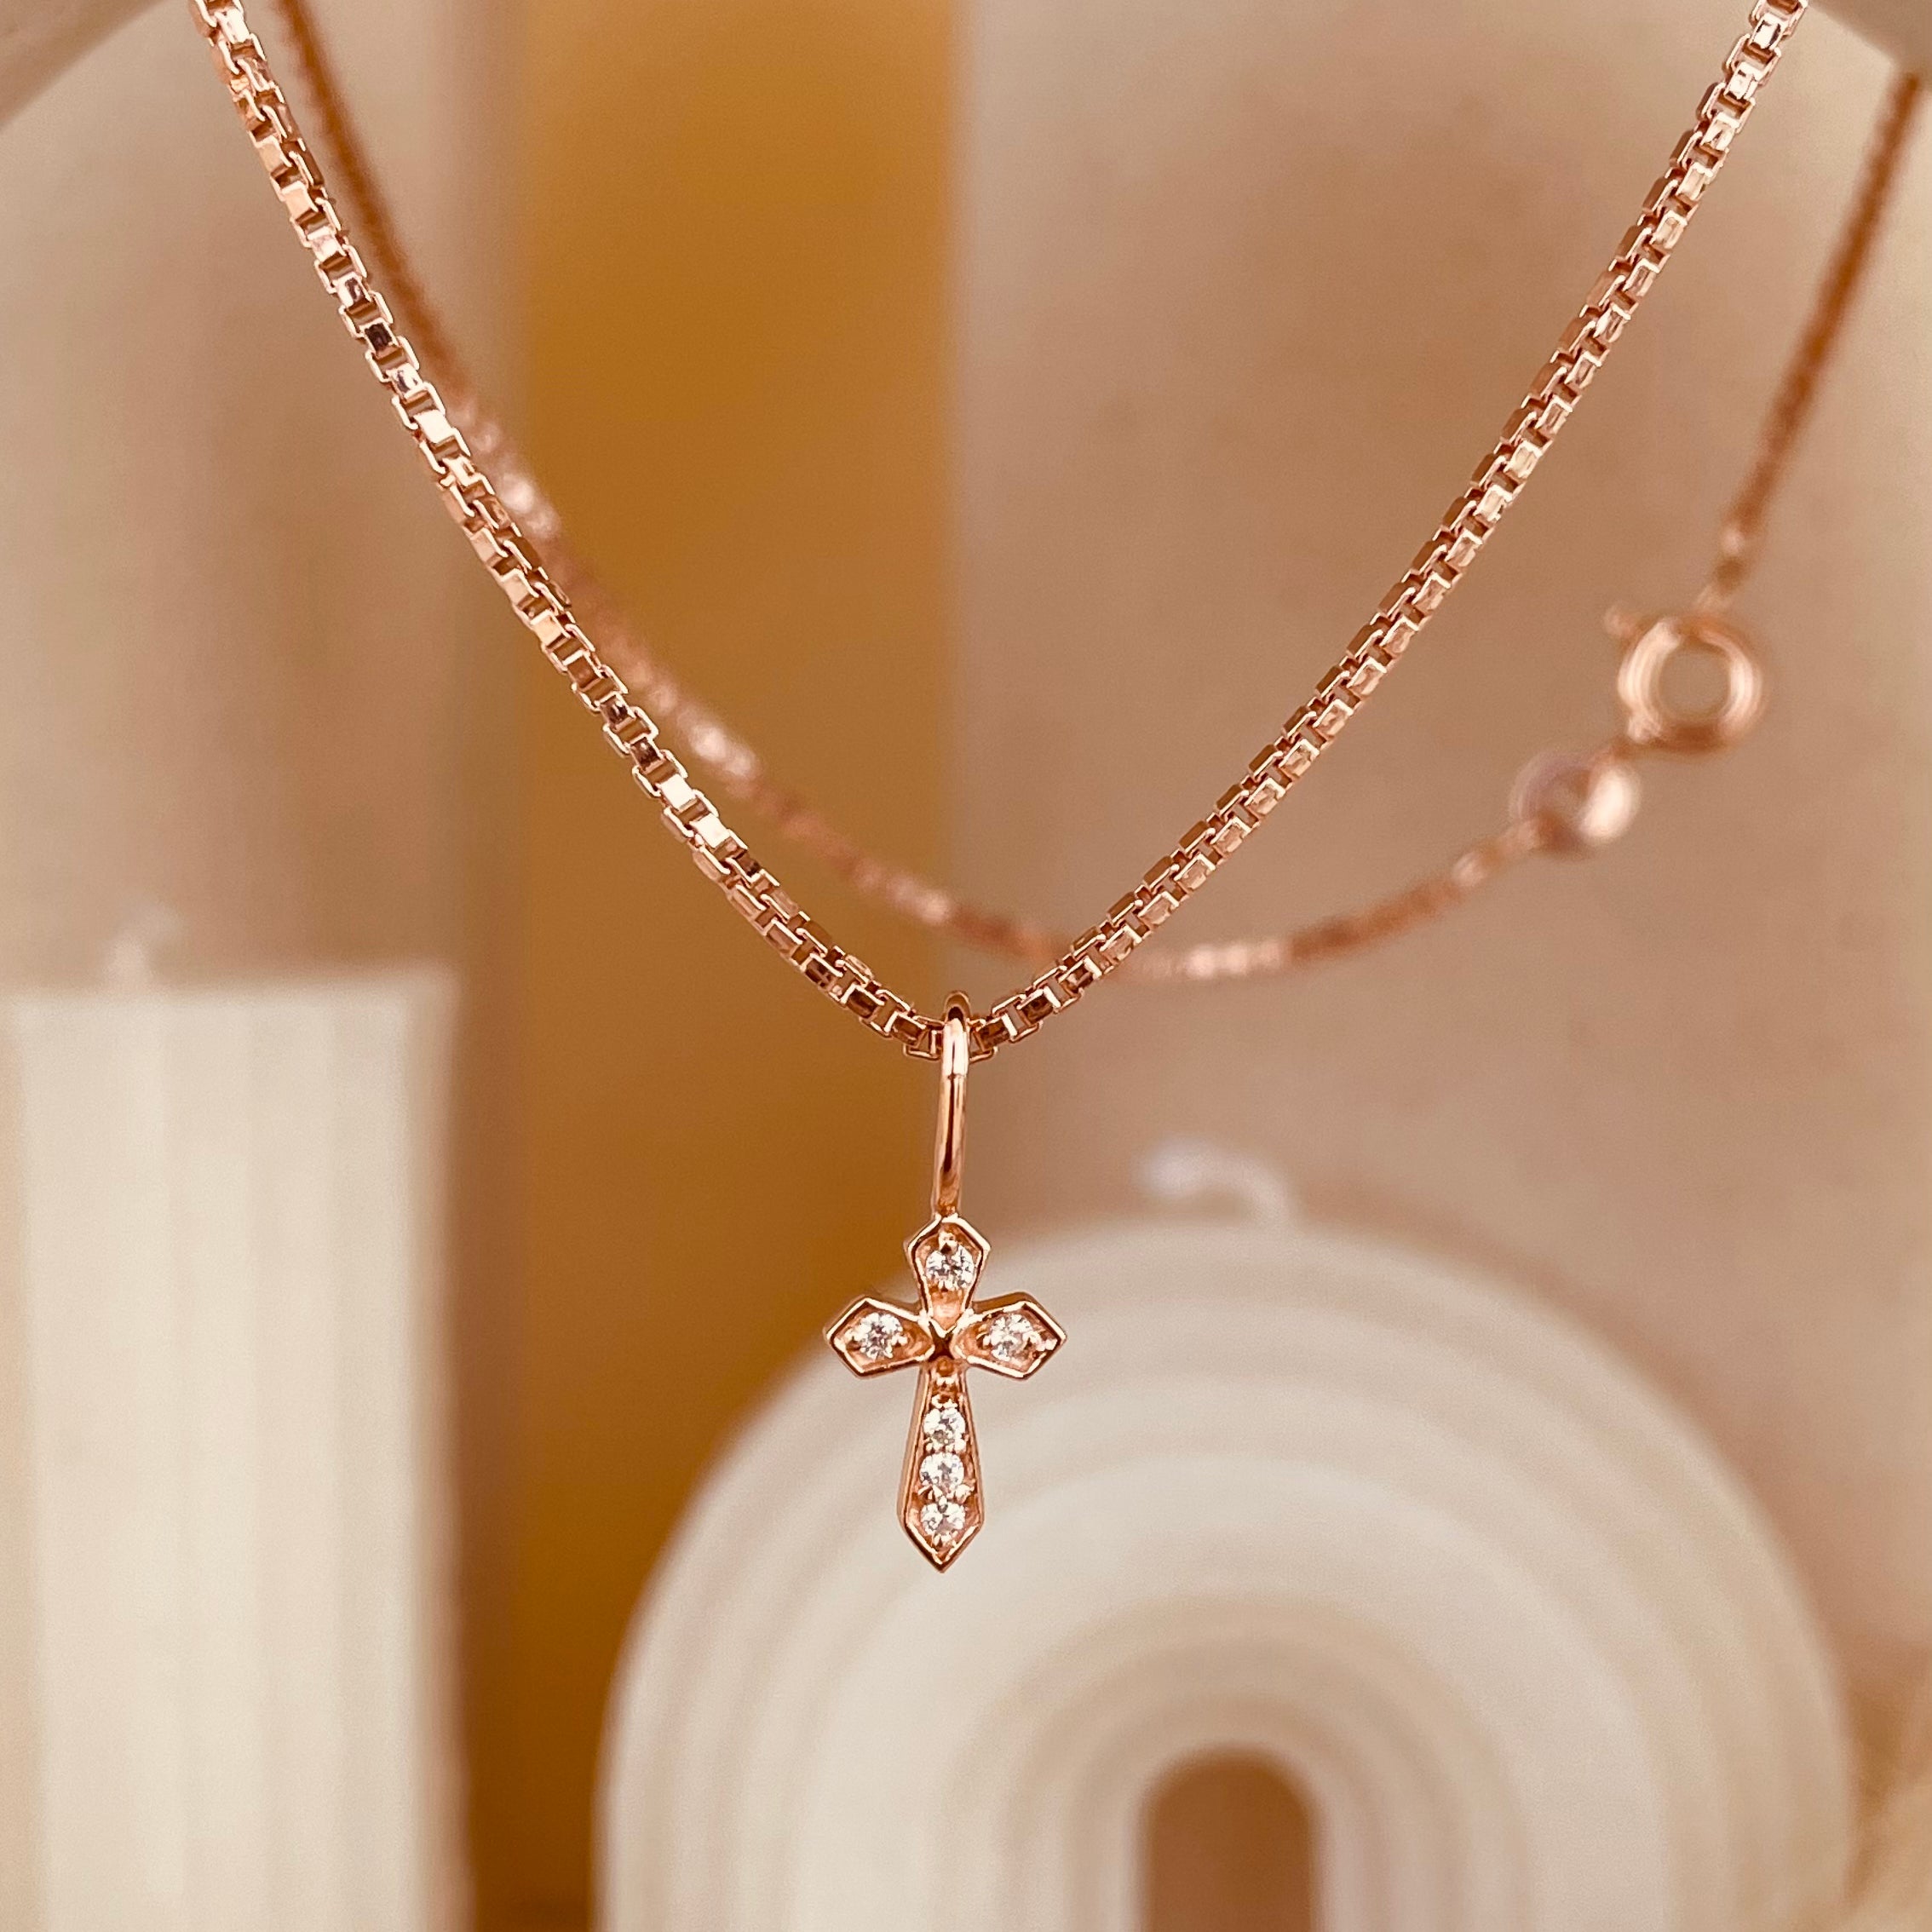 Minimal and Dainty Token of Faith Necklace with Box Chain - Octonov 